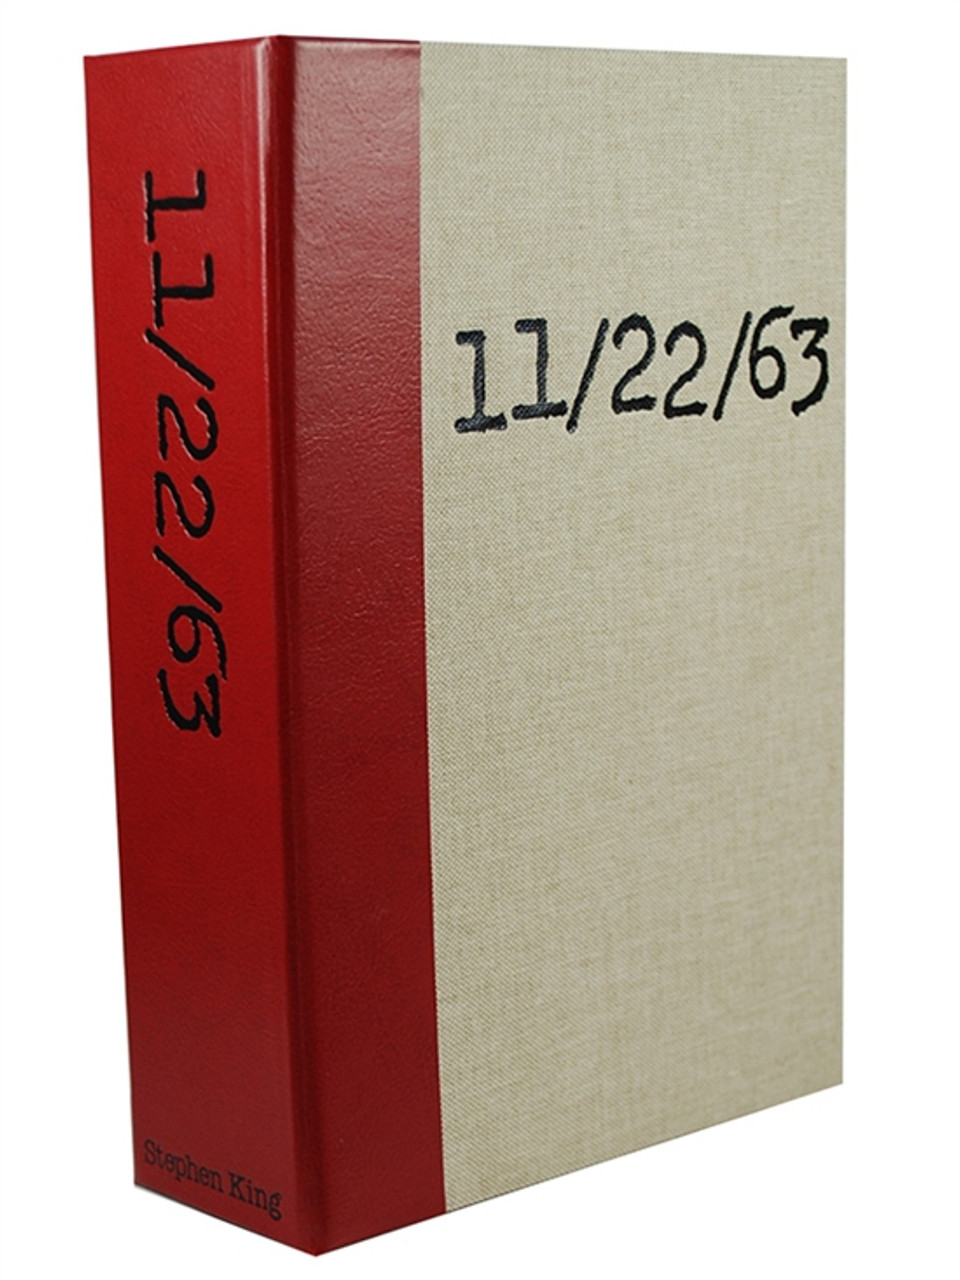 Stephen King "11/22/63" Signed First Edition - First Printing , Very Fine condition